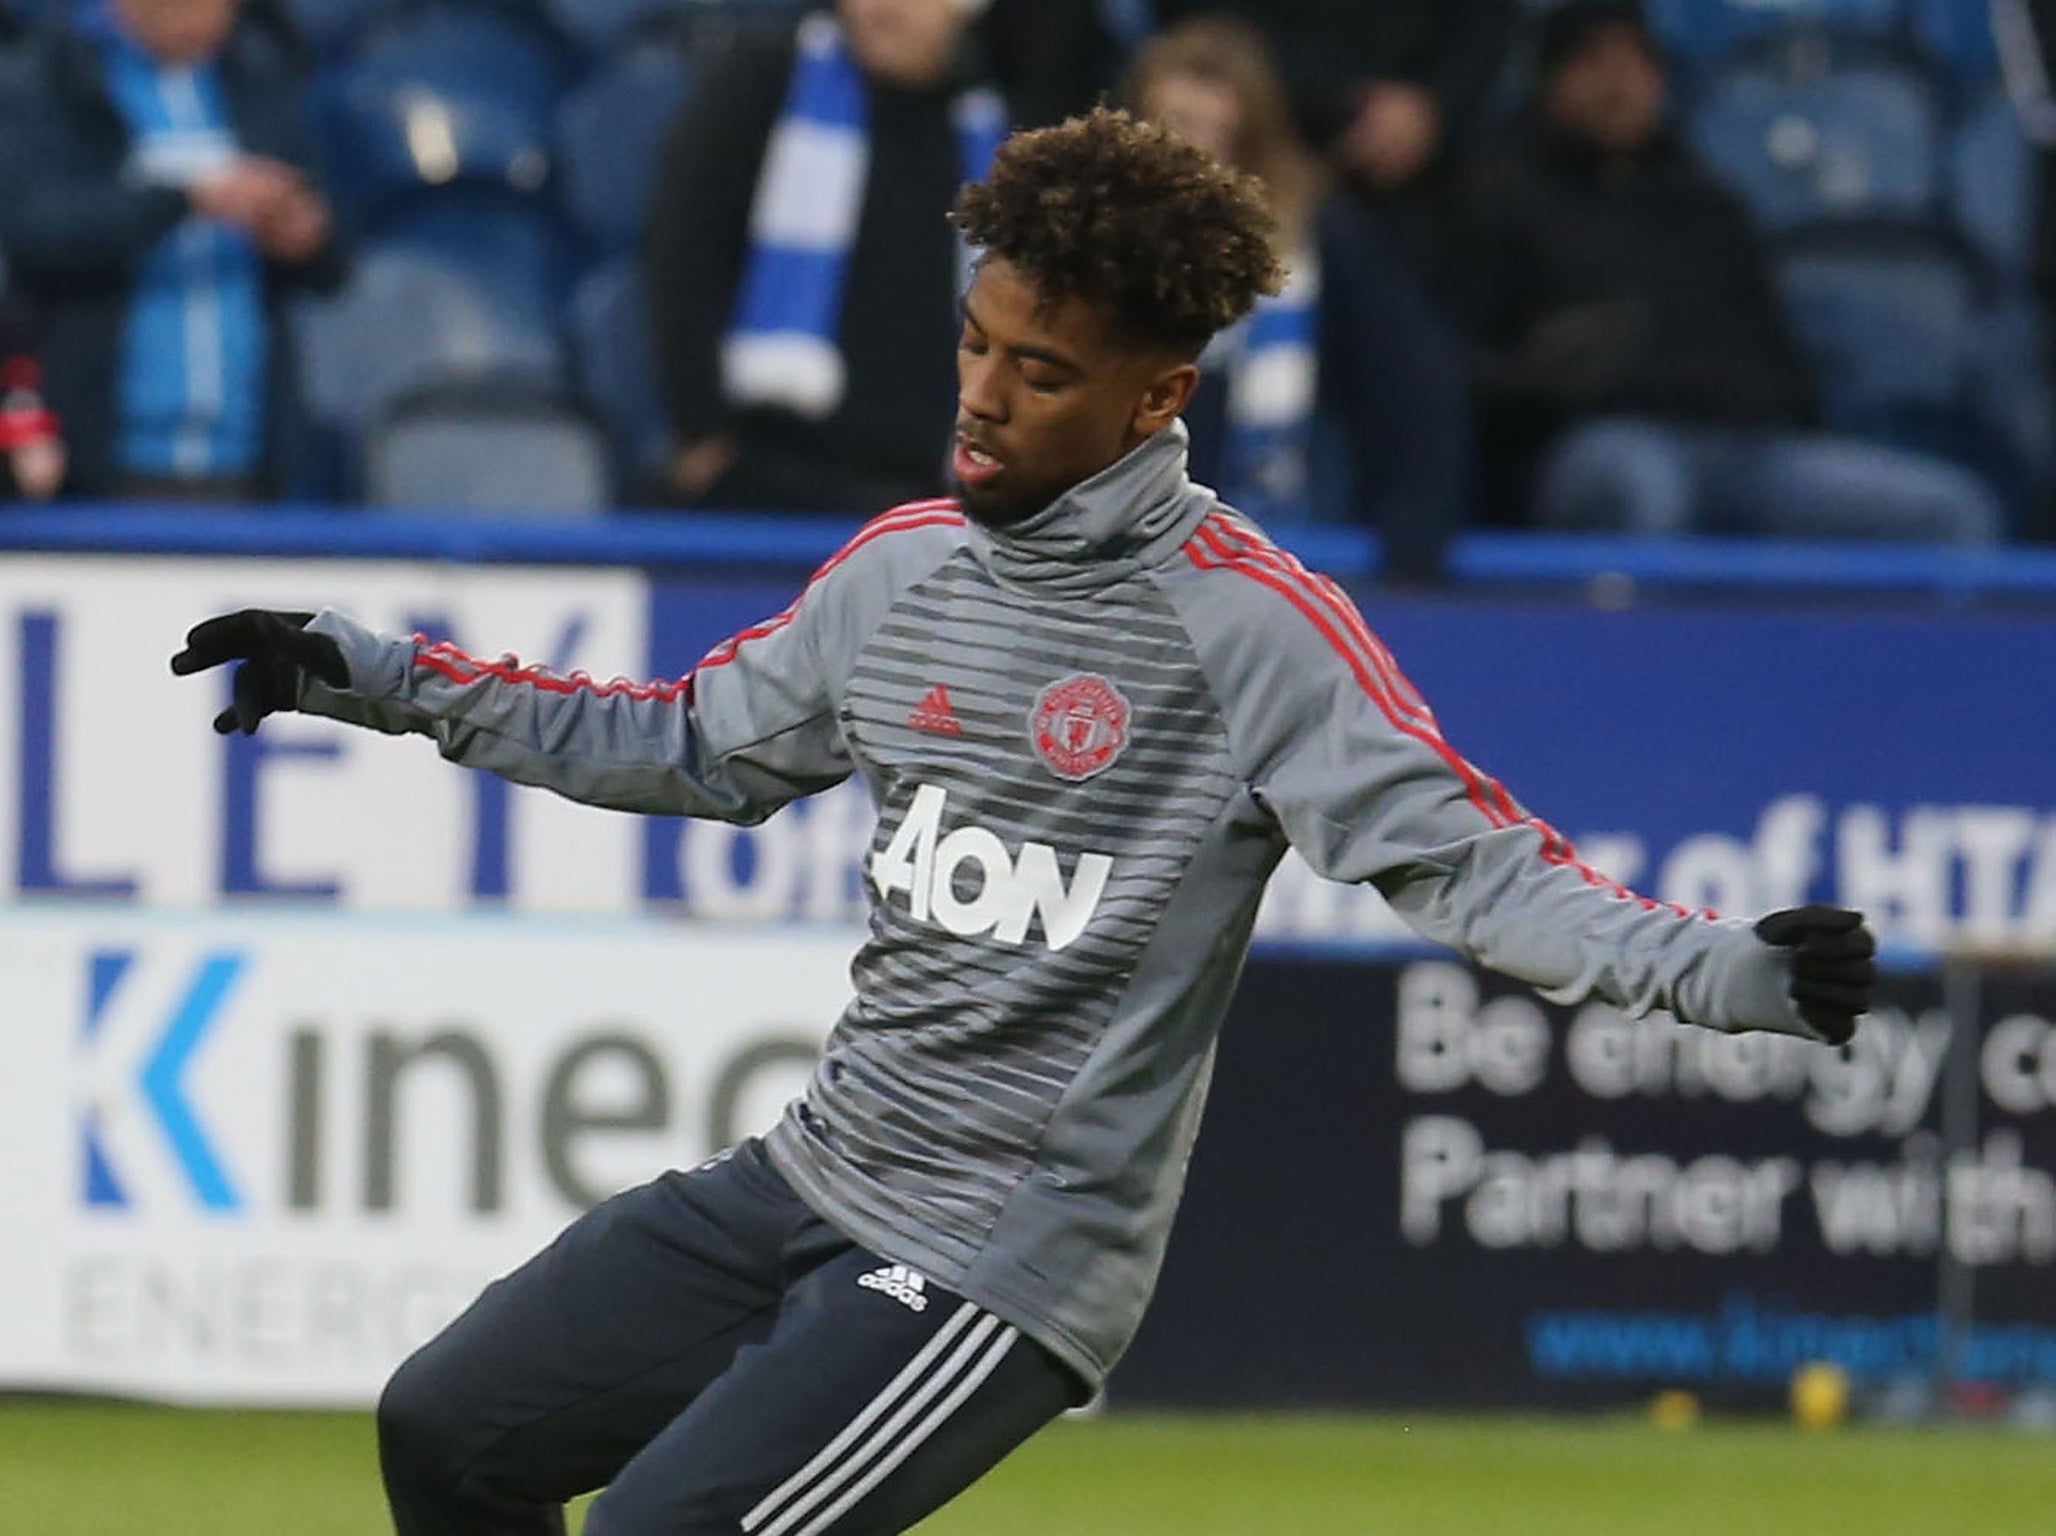 Angel Gomes played for the U23s before the FA Cup tie